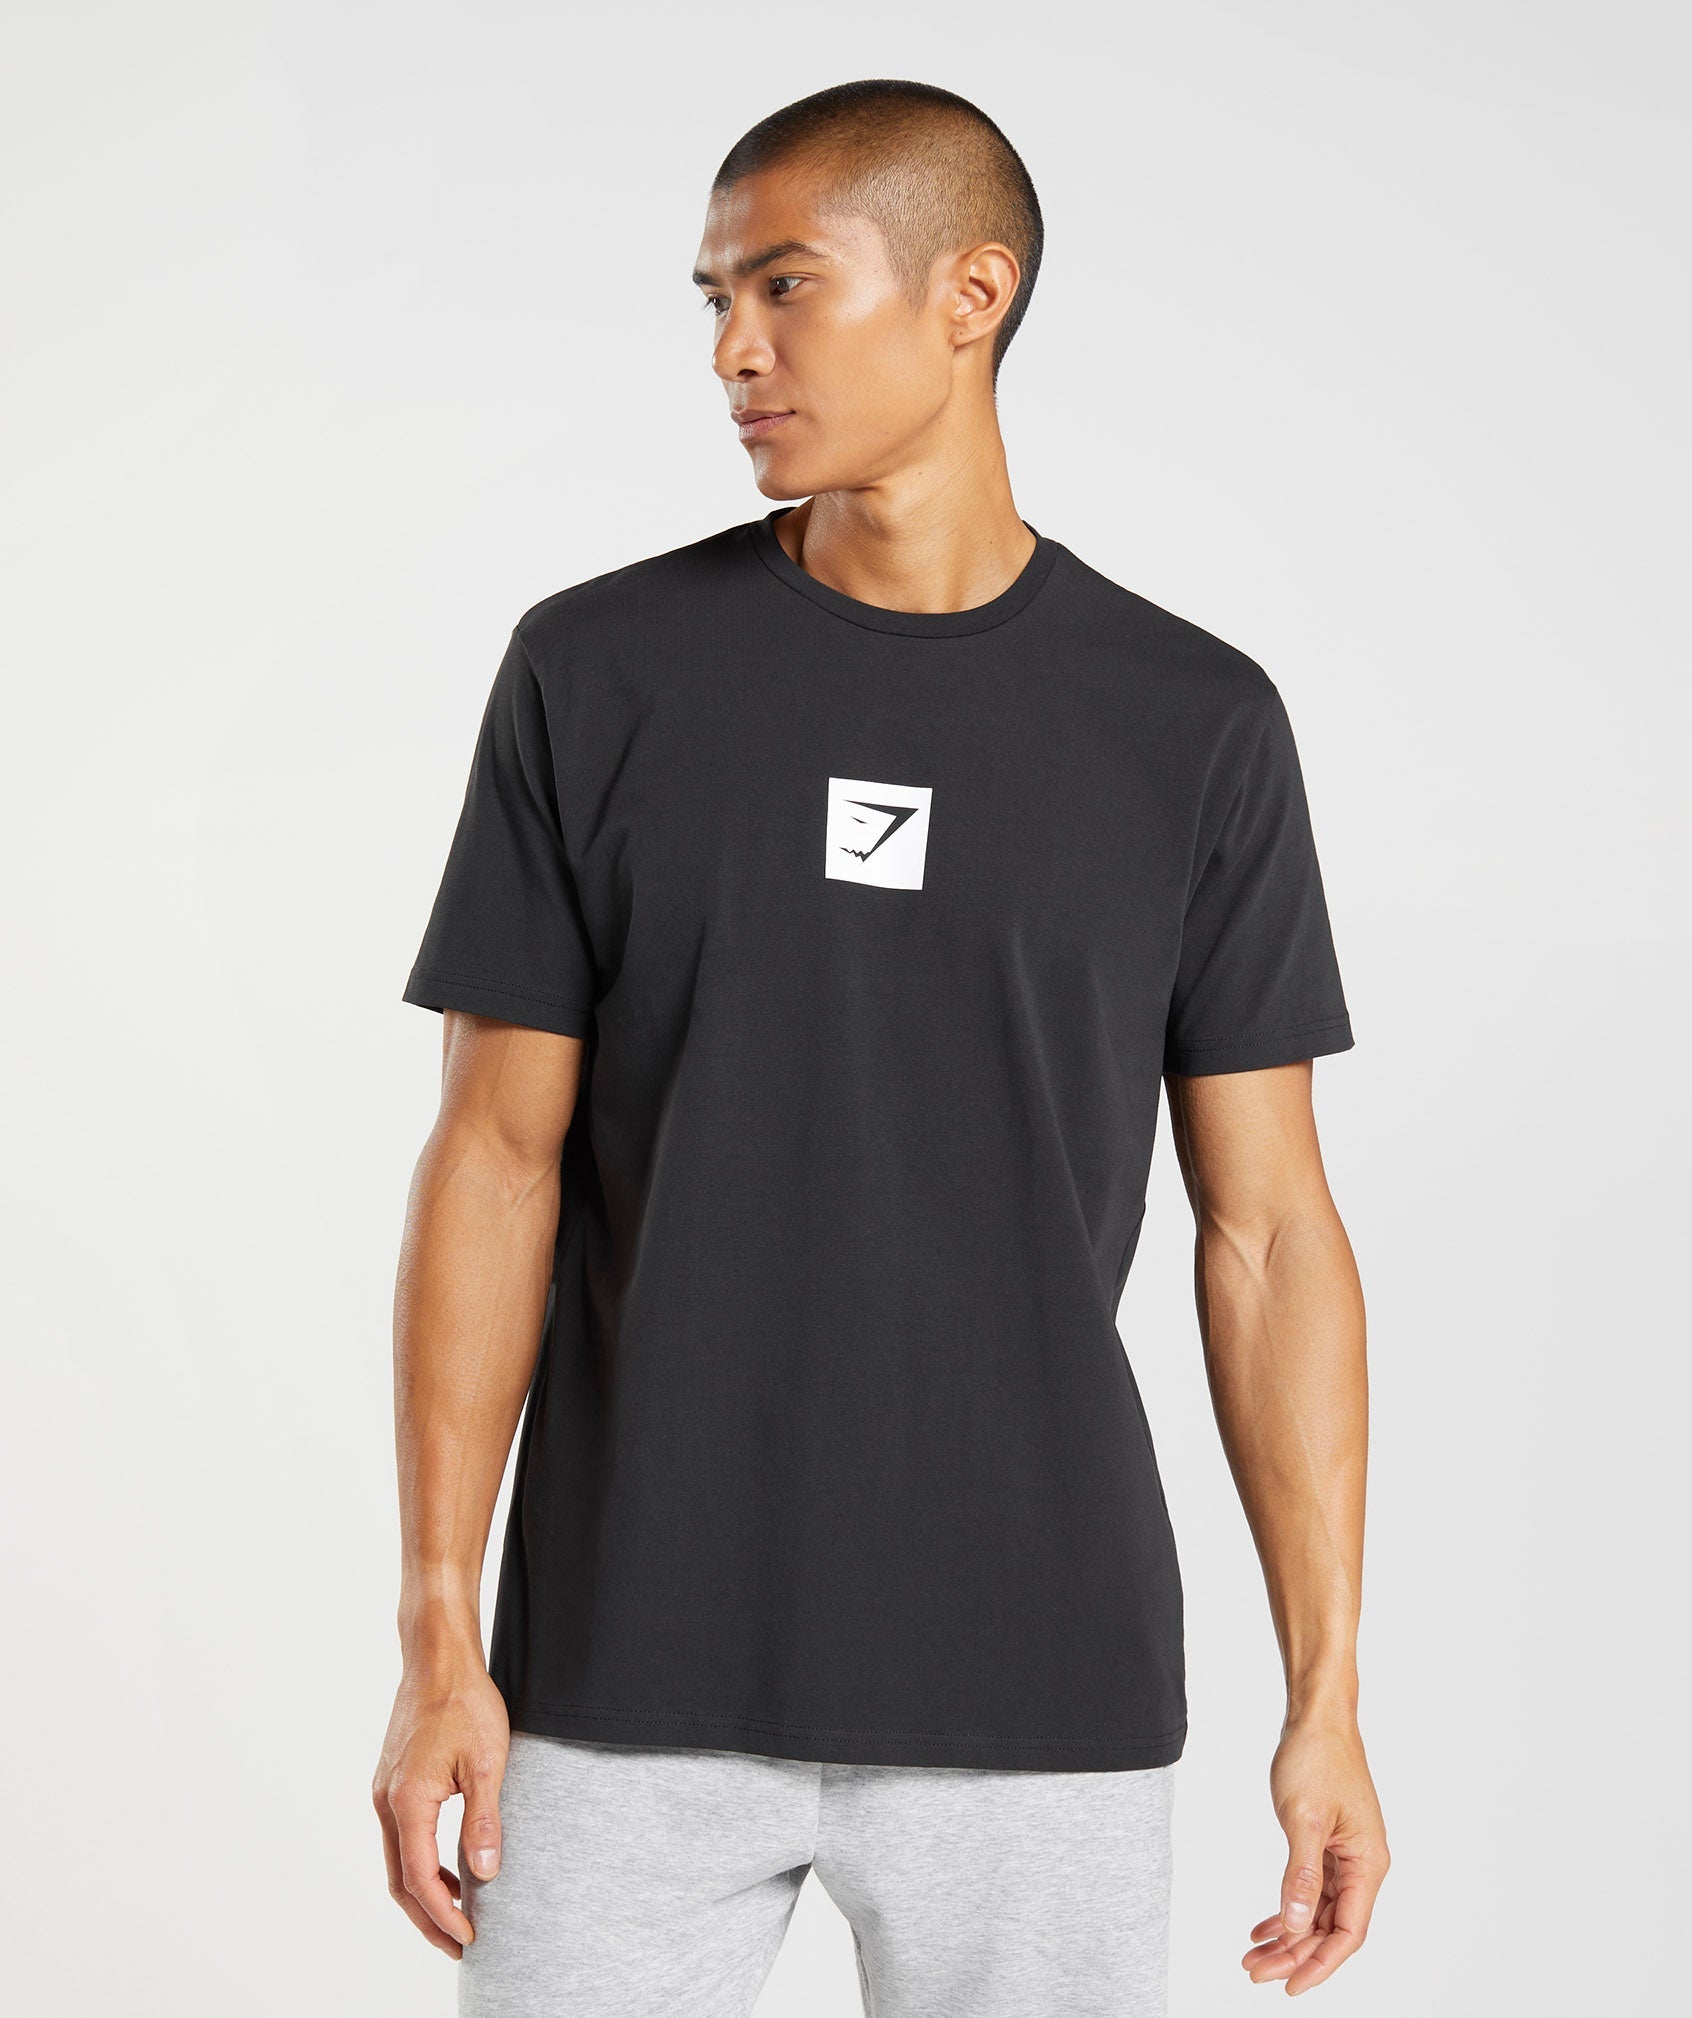 Outline T-Shirt in Black - view 1